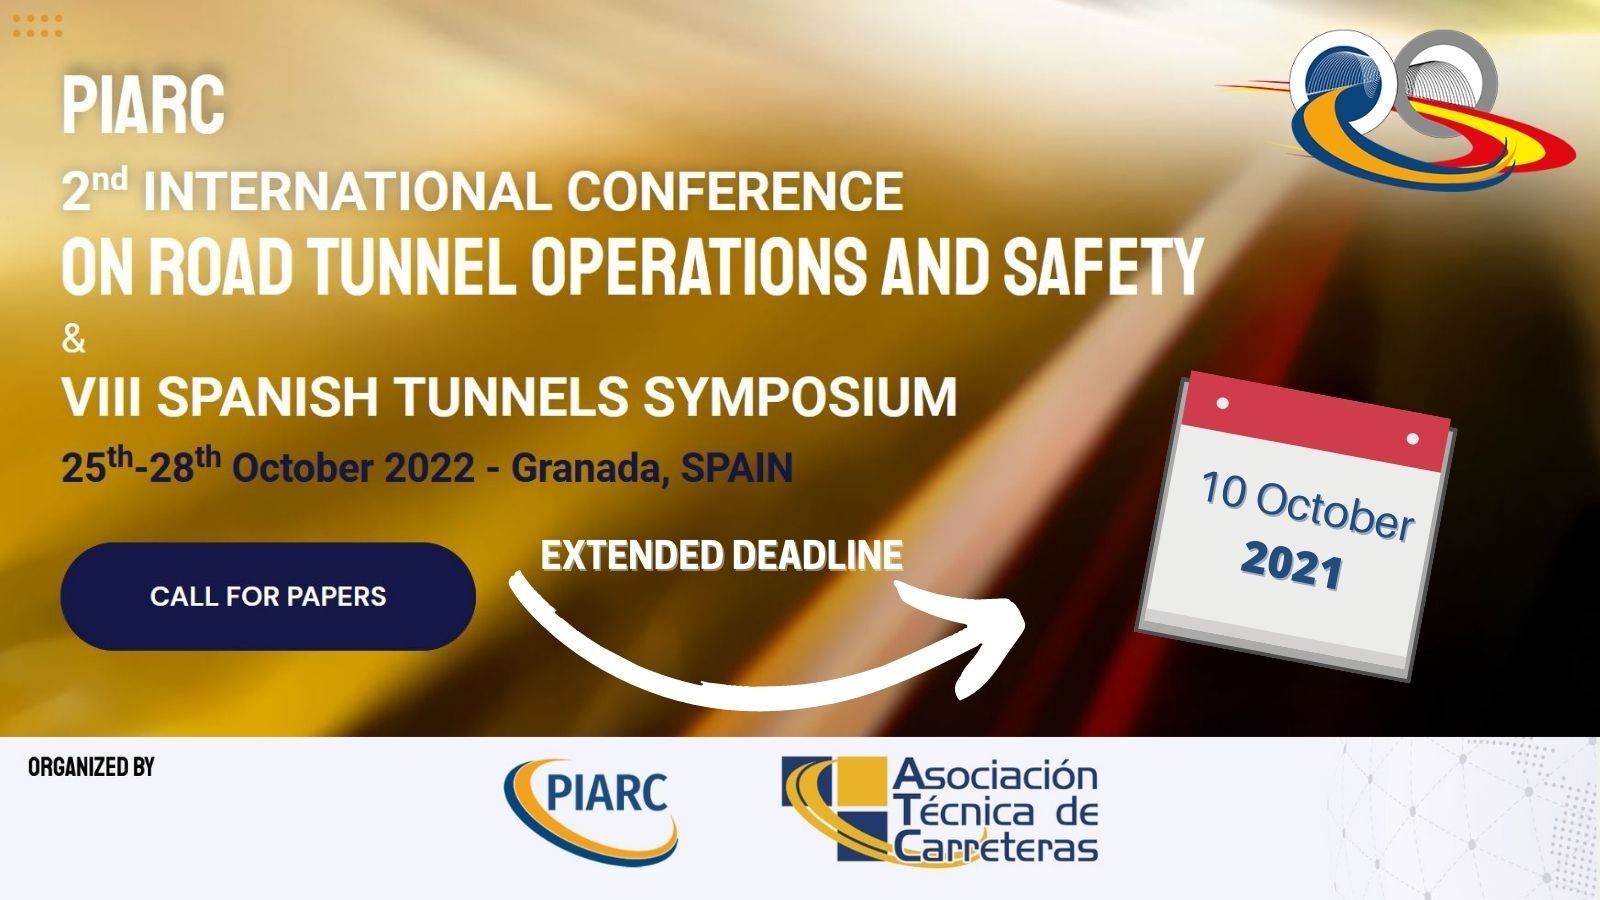 Are you an expert in road tunnels? Deadline extended! Submit your 300-word abstract before 10 October 2021!